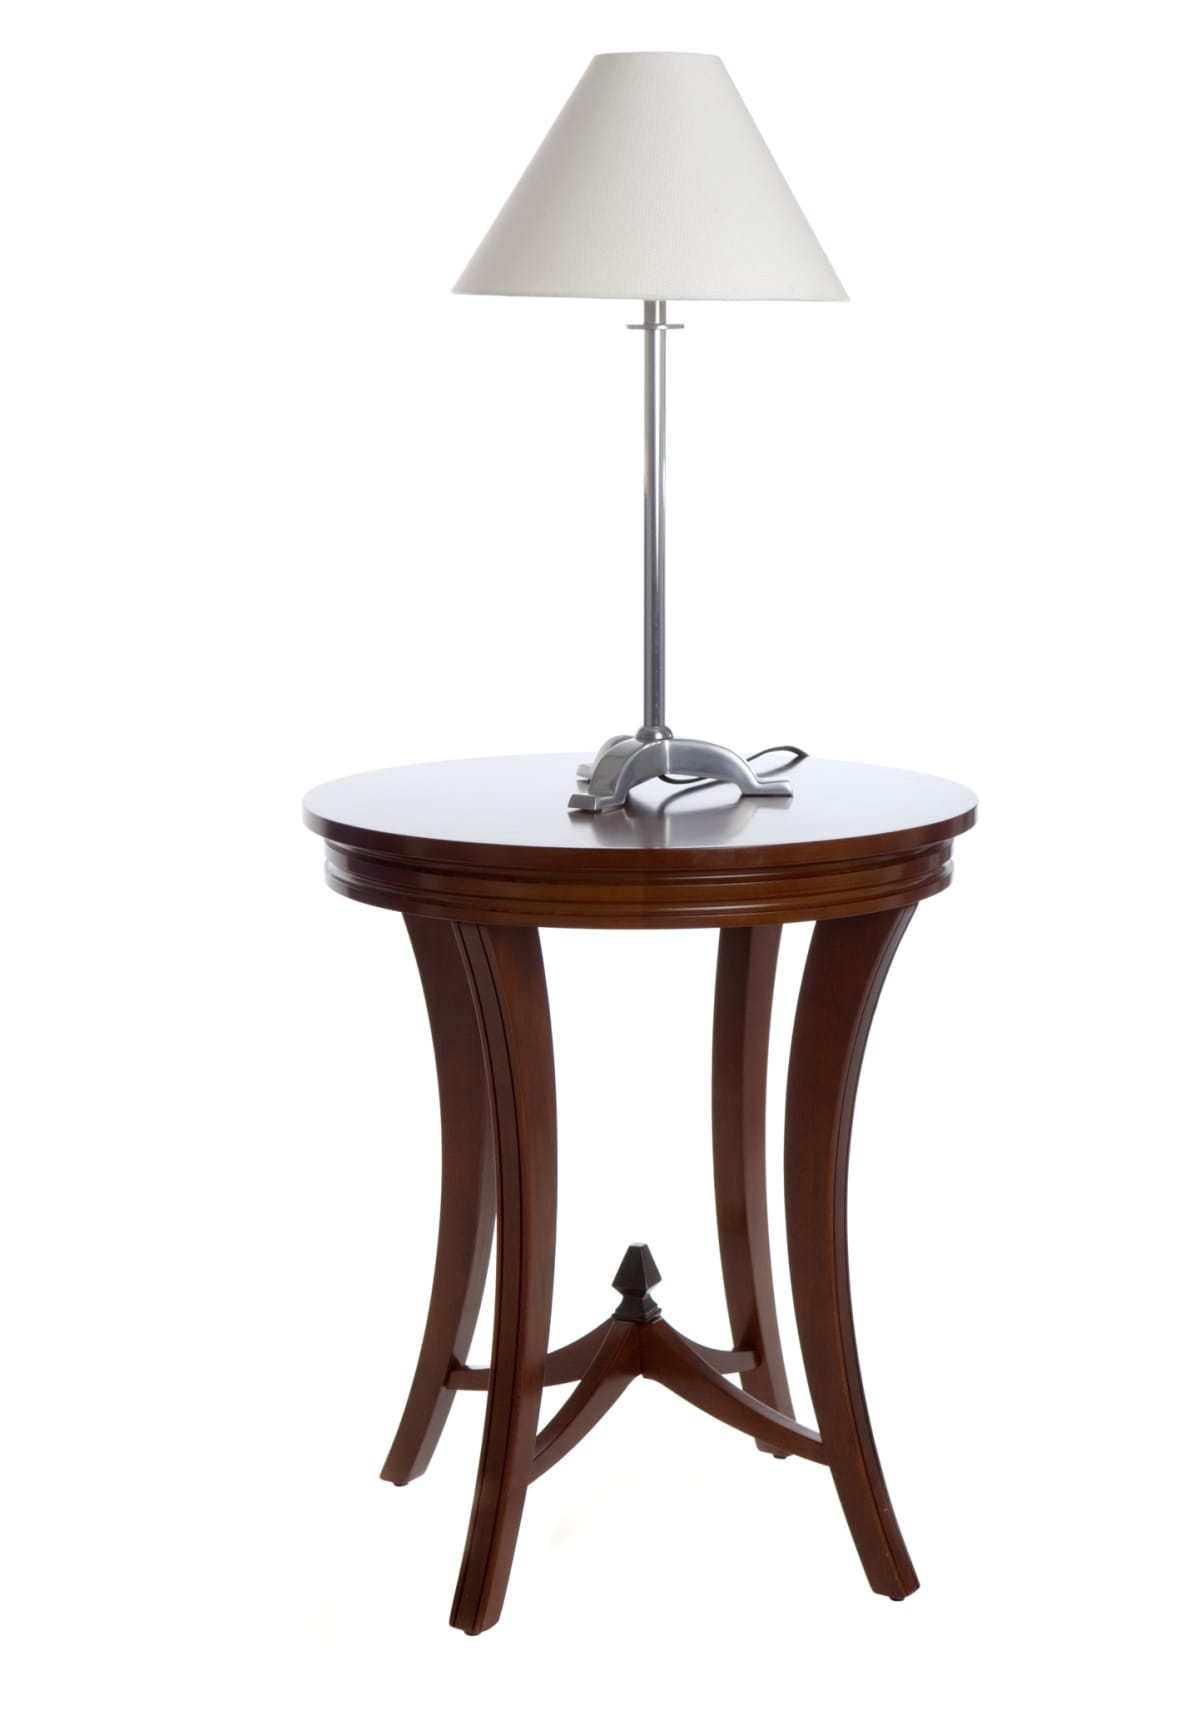 A lamp on a table